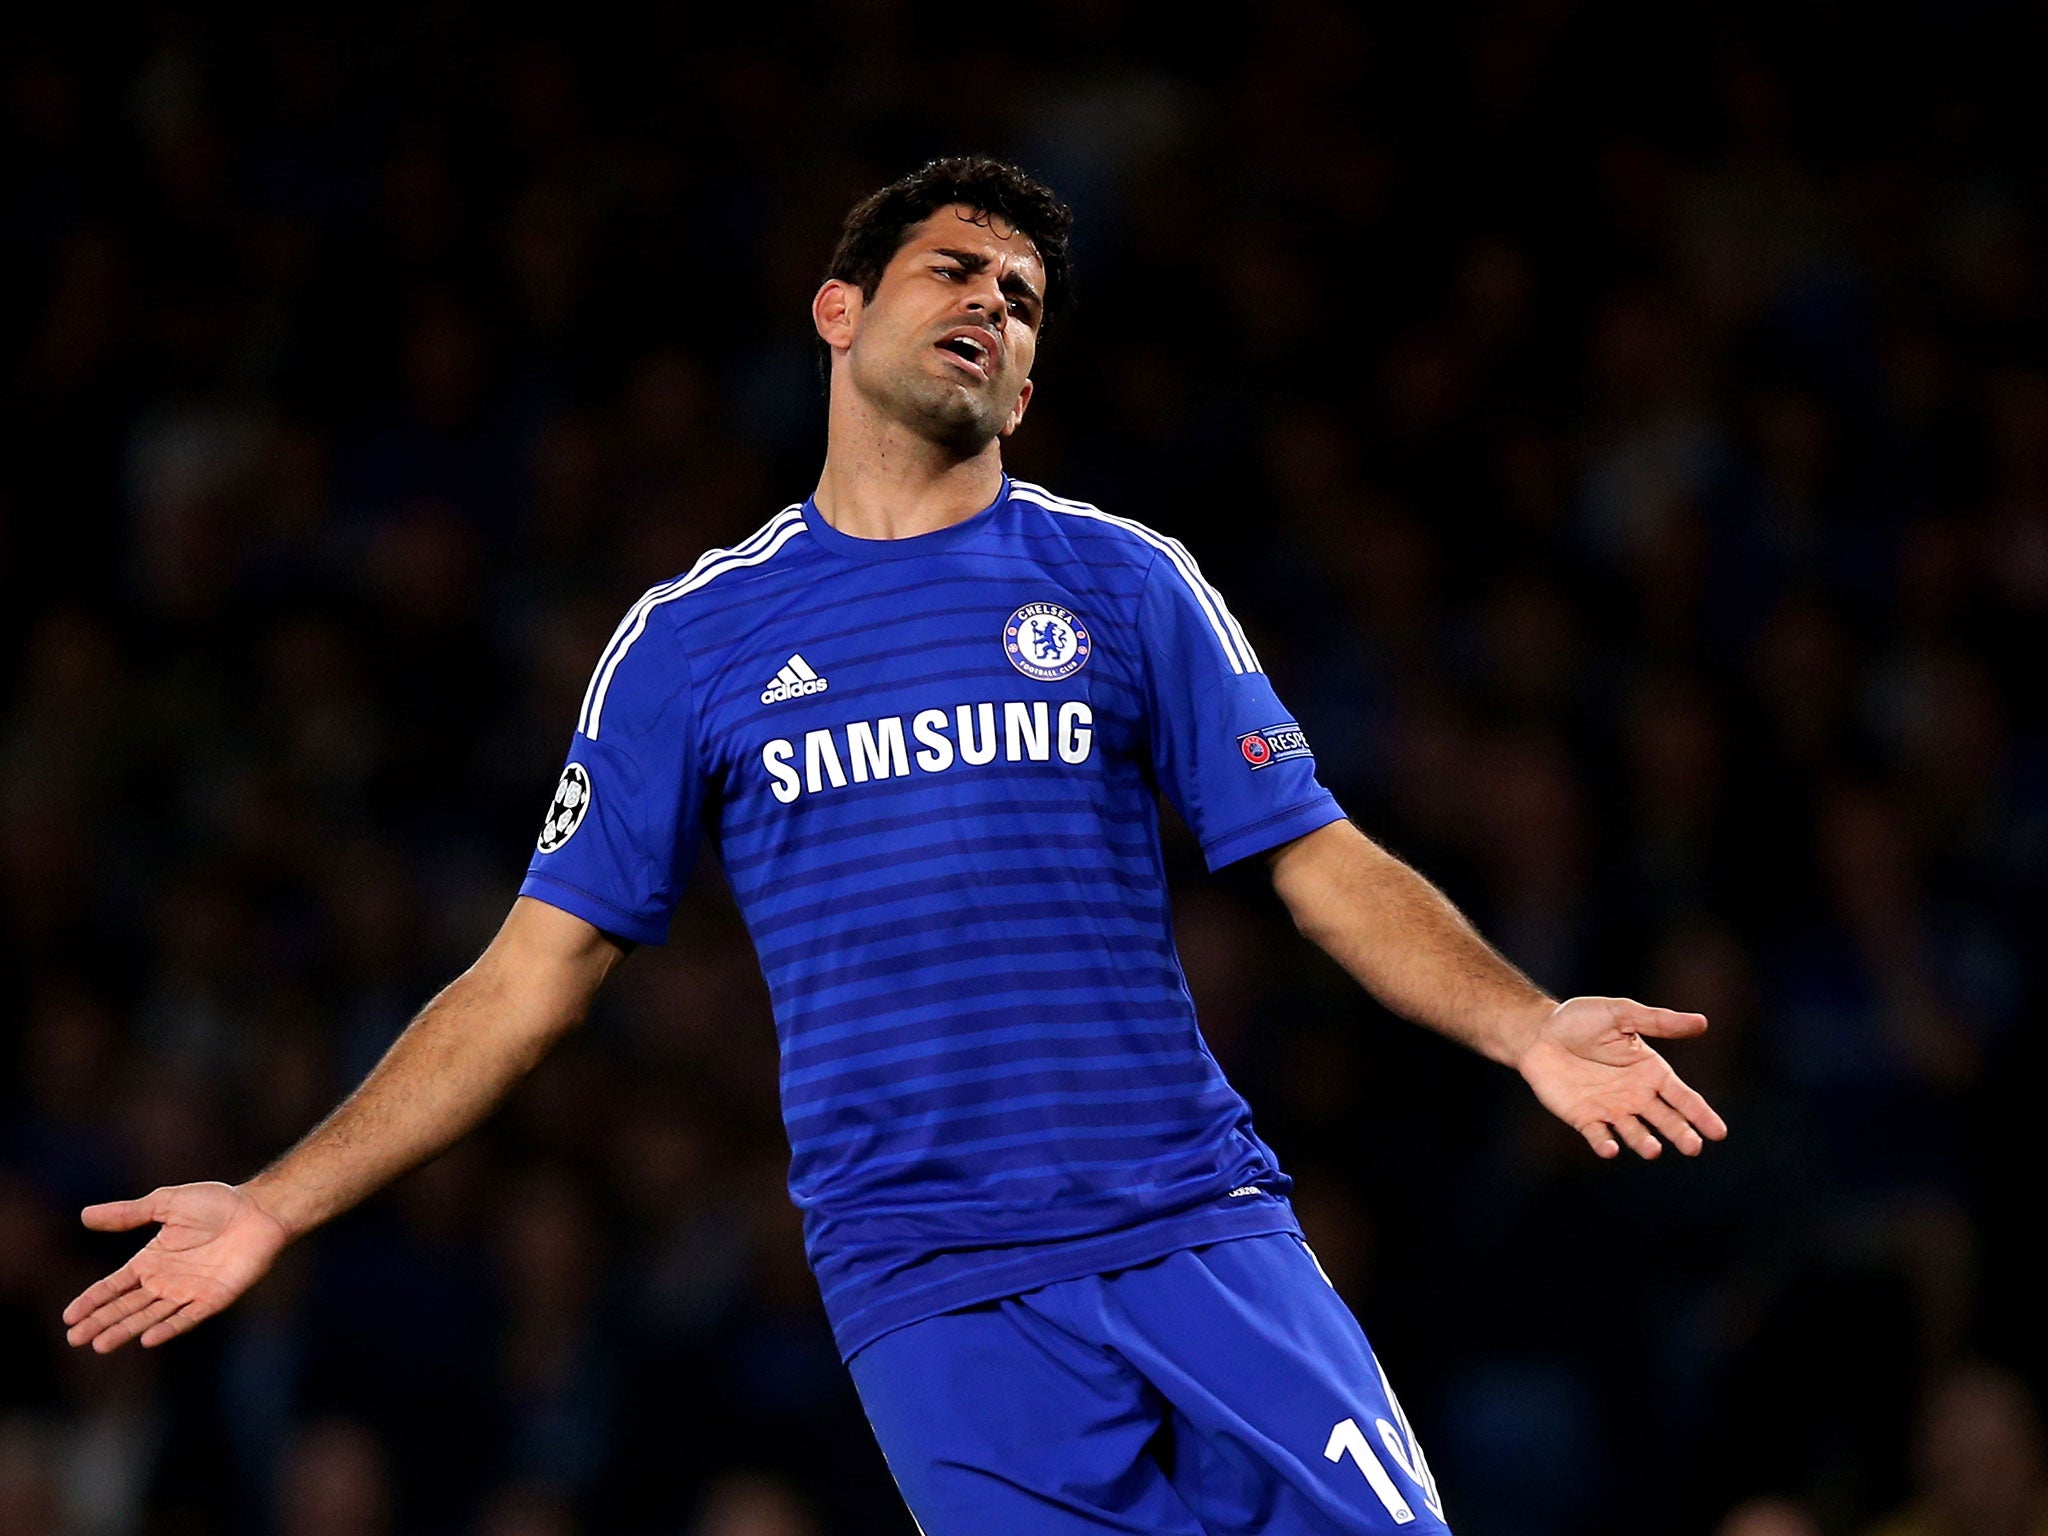 Diego Costa reacts during his late cameo performance against Schalke on Wednesday night